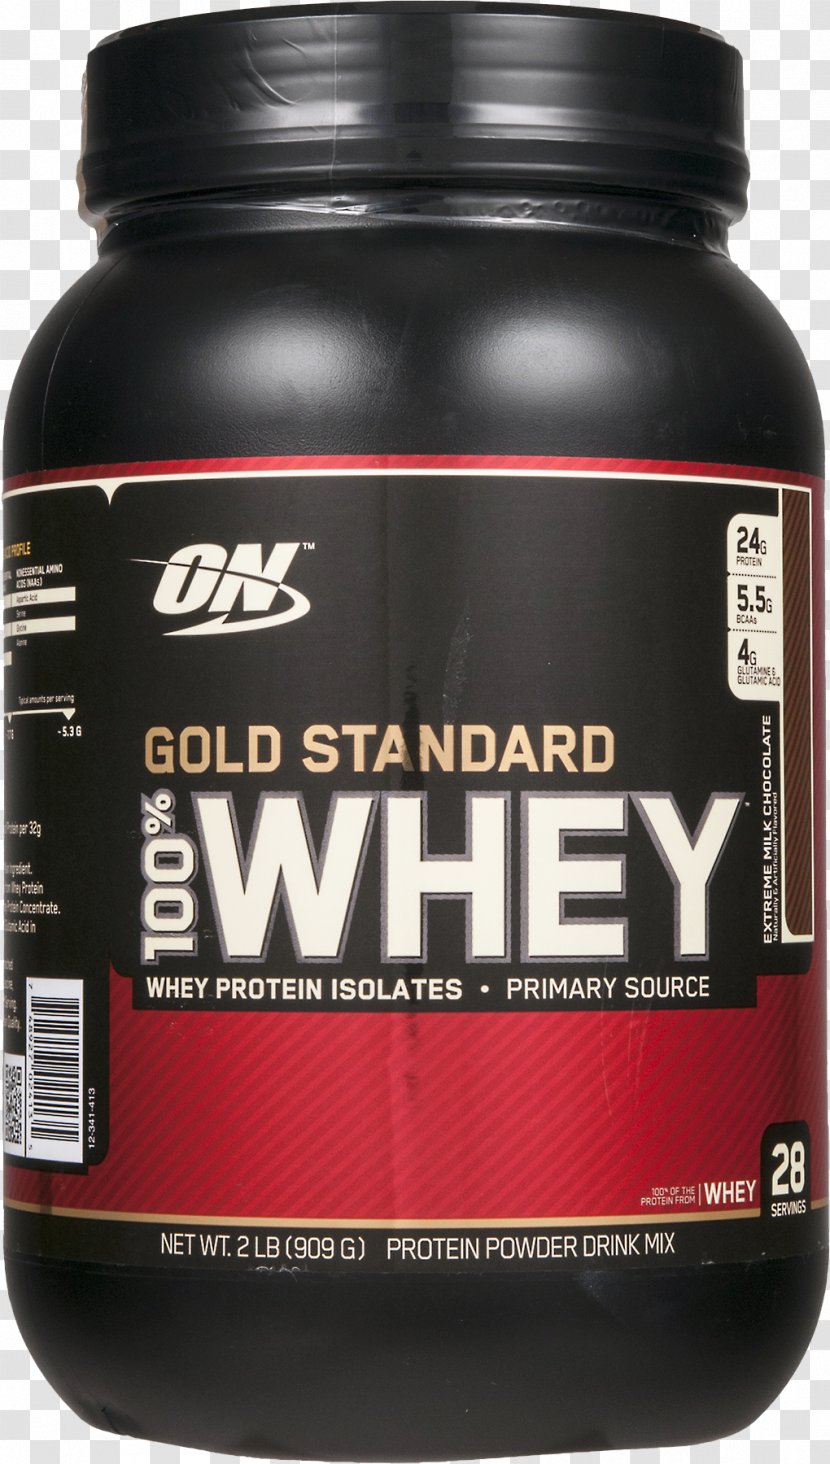 Dietary Supplement Whey Protein Isolate Bodybuilding - Cardiff Sports Nutrition Ltd - Health Transparent PNG